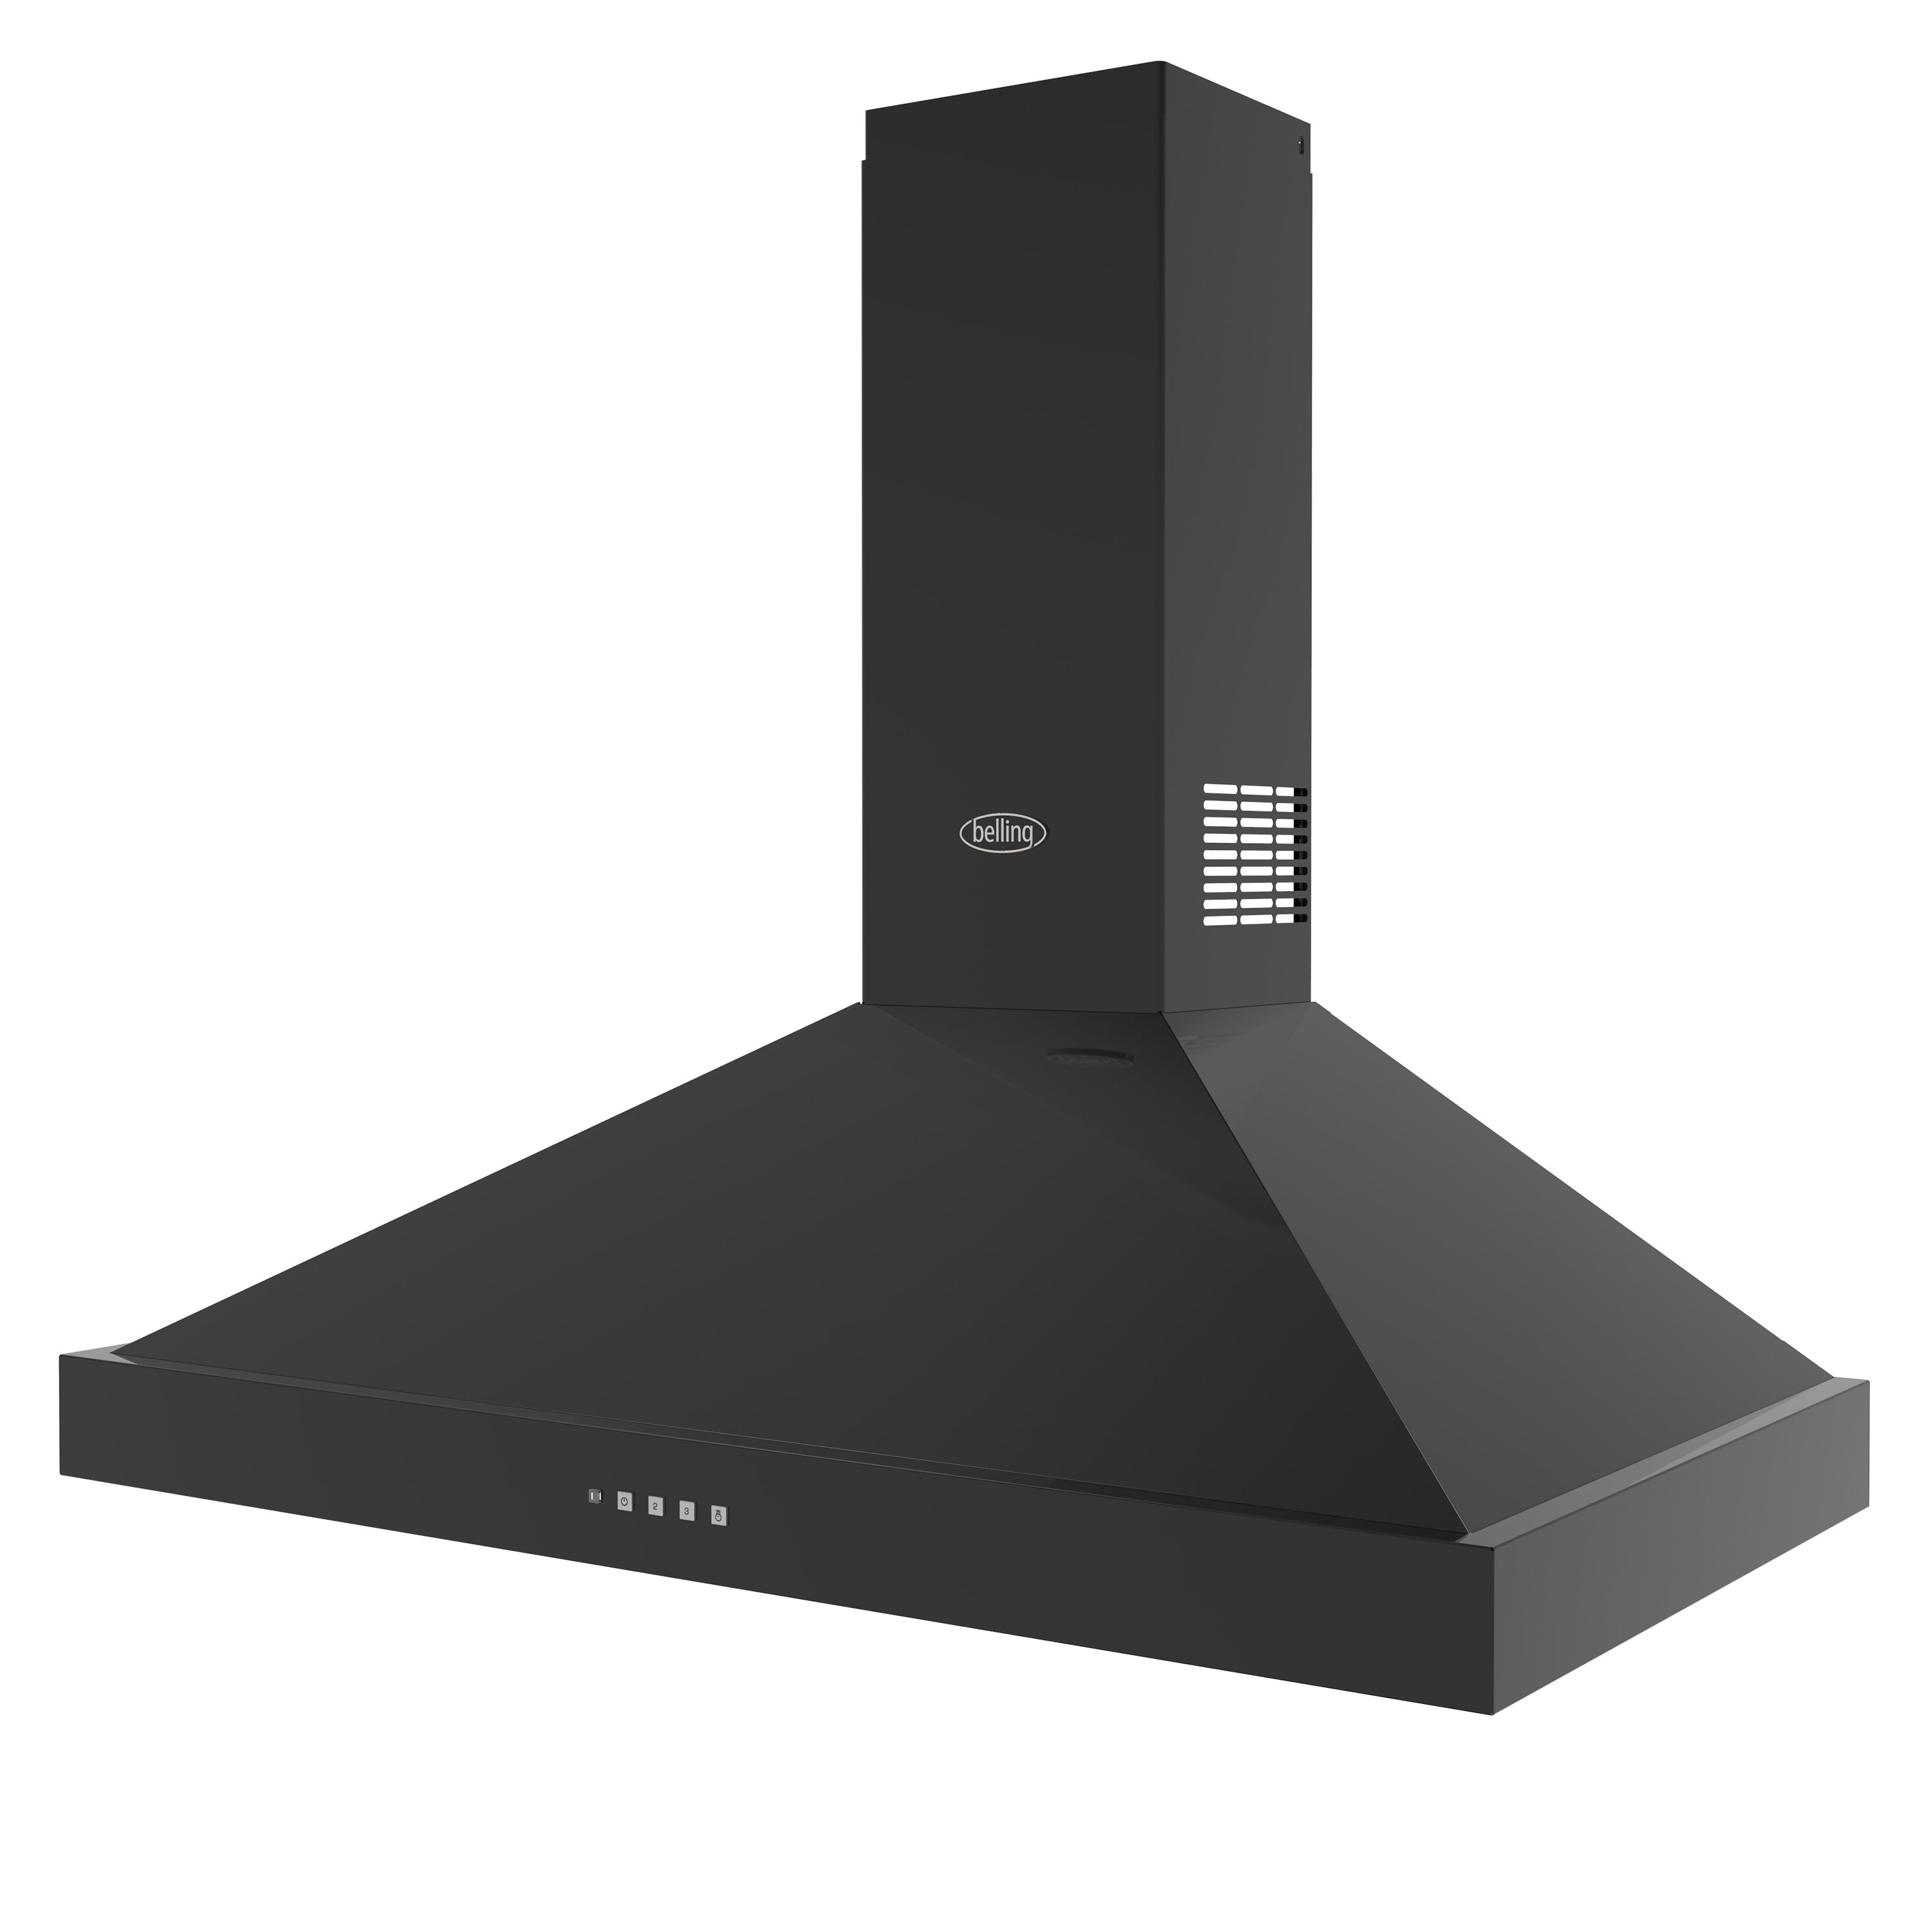 100cm Chimney hood with 3 fan speeds, 2 LED lights, 2 washable grease filters and extendable chimney section